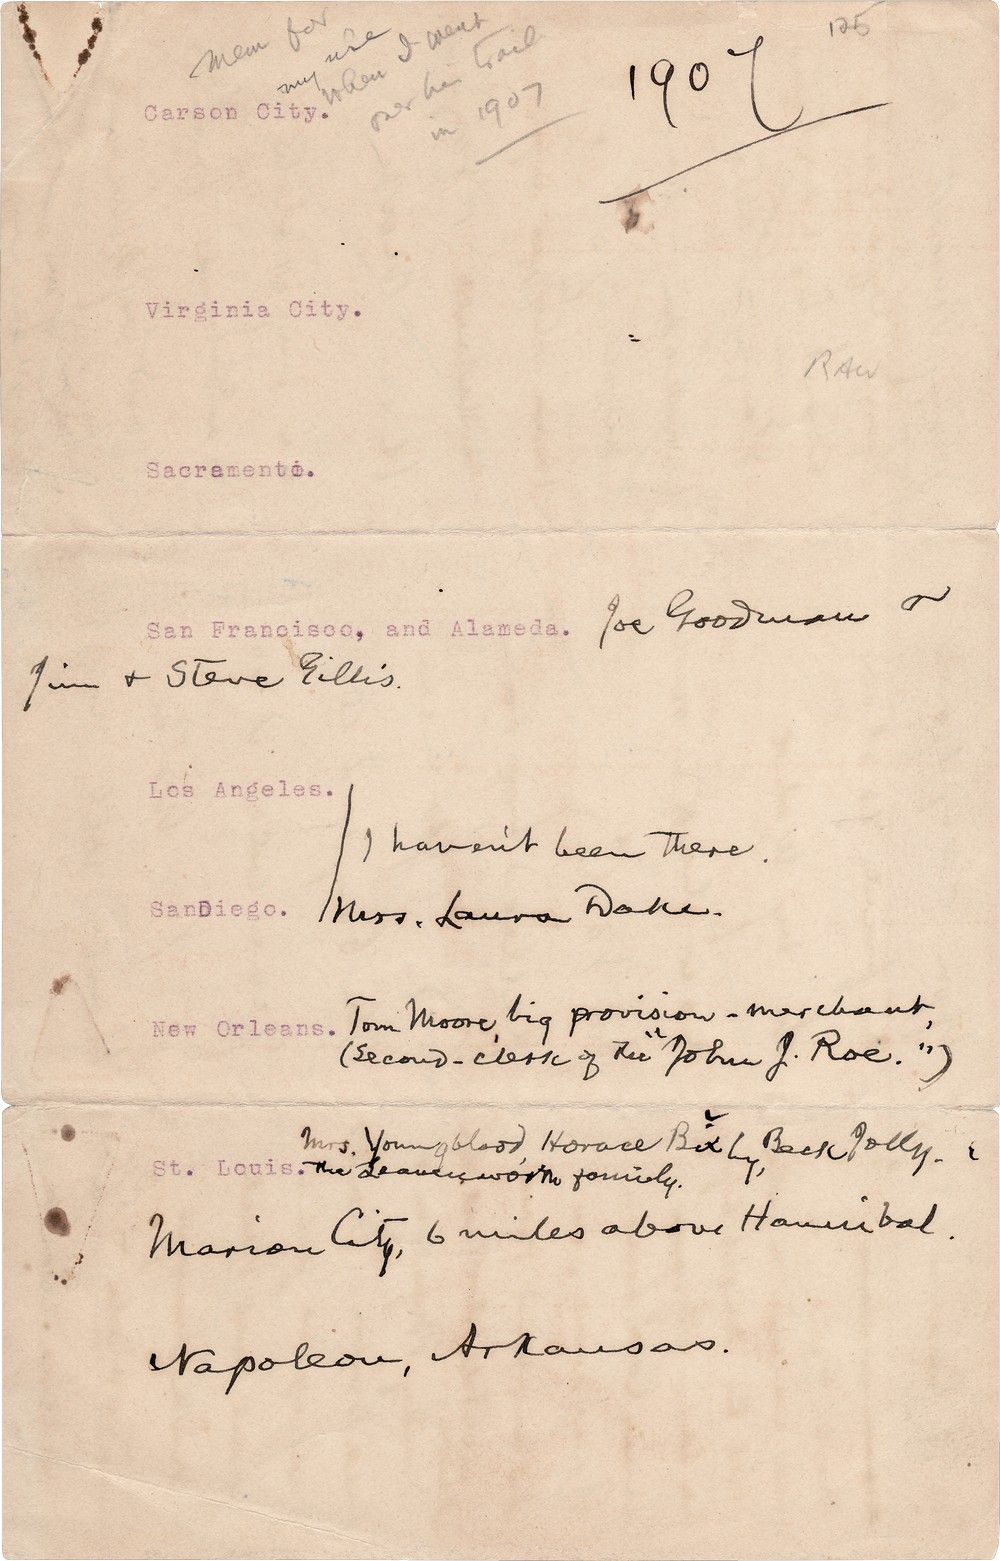 Mark Twain's Autograph Notes Regarding People, Places, and Recalling an Incident